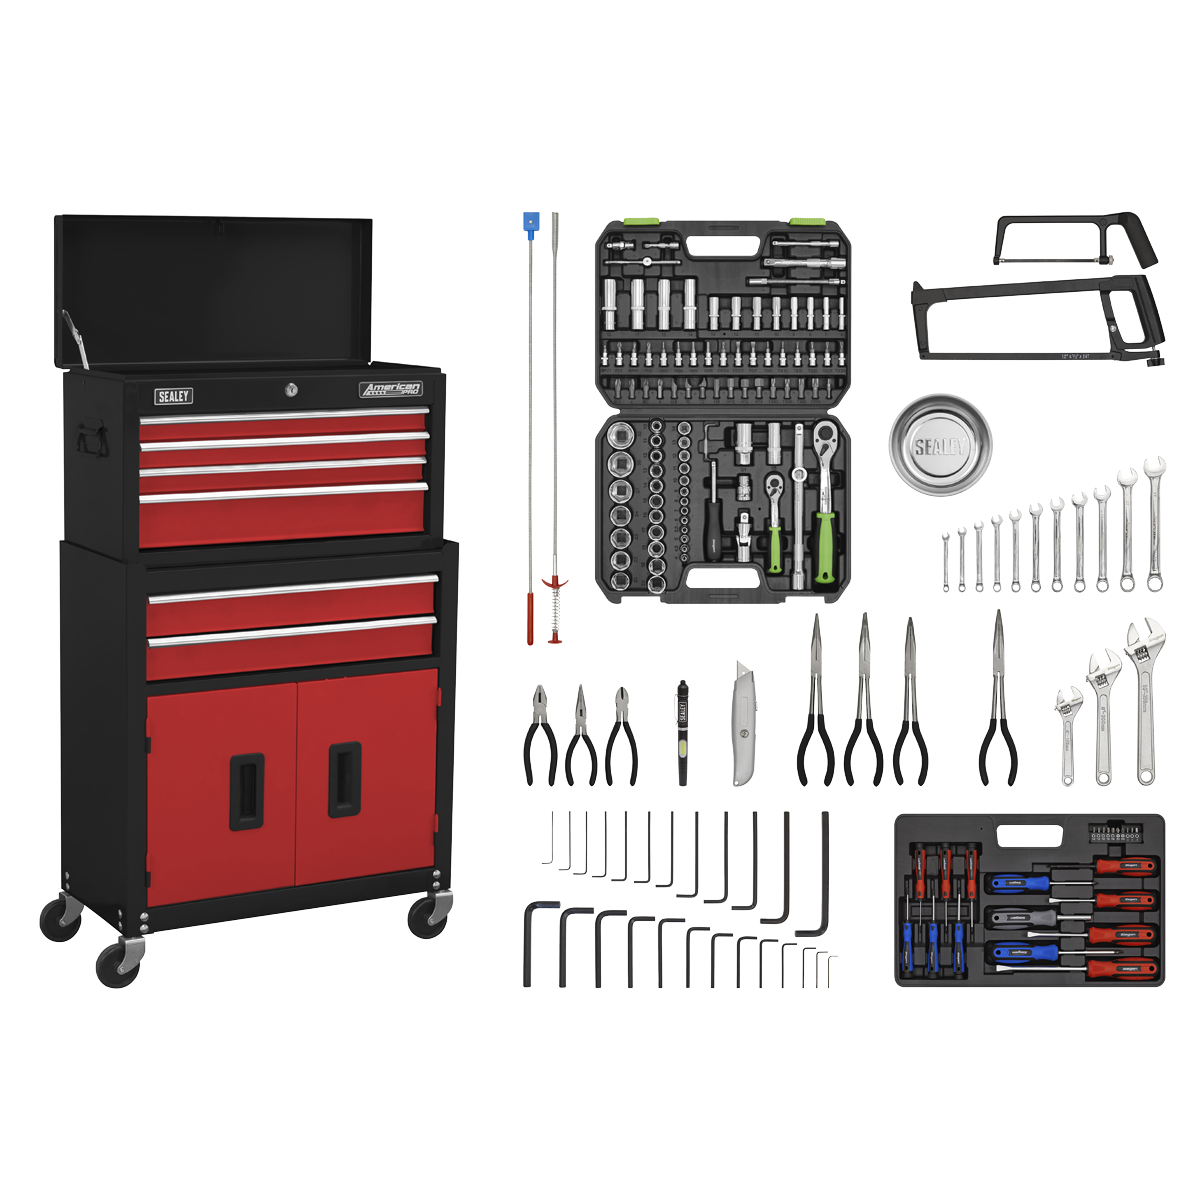 Topchest & Rollcab Combination 6 Drawer with Ball-Bearing Slides - Red/Black & 170pc Tool Kit - AP22RCOMBO - Farming Parts